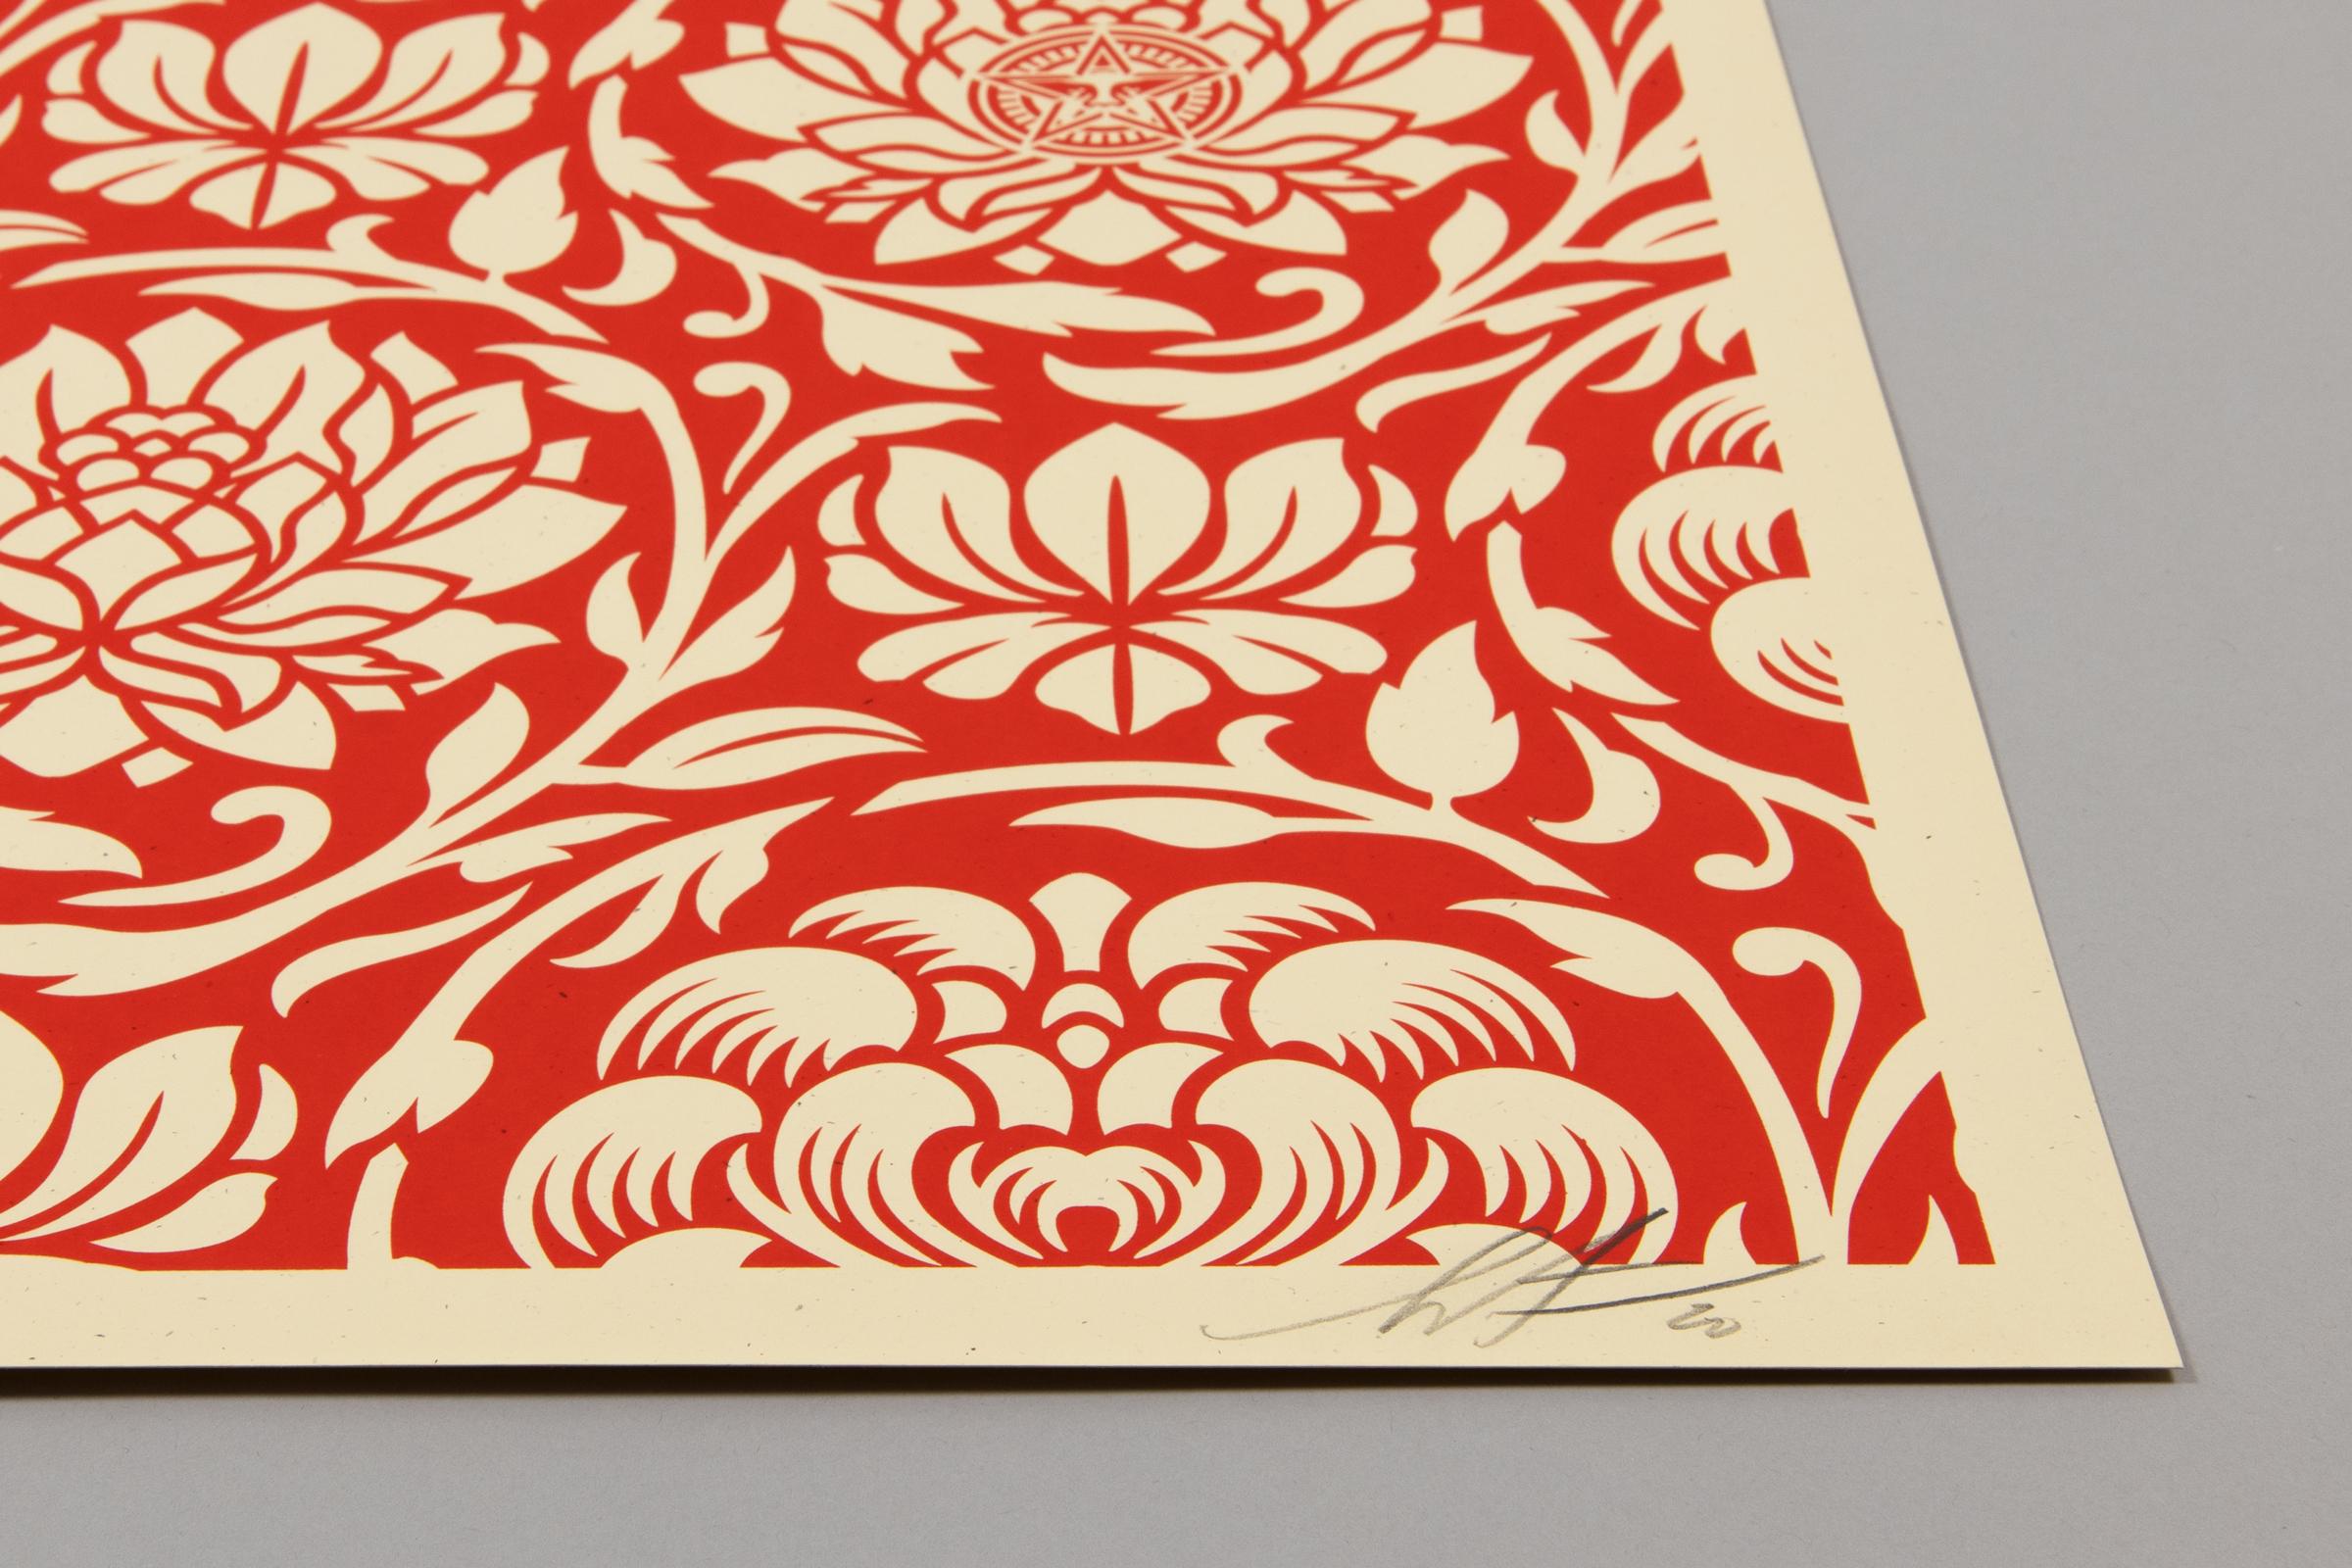 Shepard Fairey, Floral Harmony (Red Yin/Yang) - 2 Signed Prints, Street Art  For Sale 2